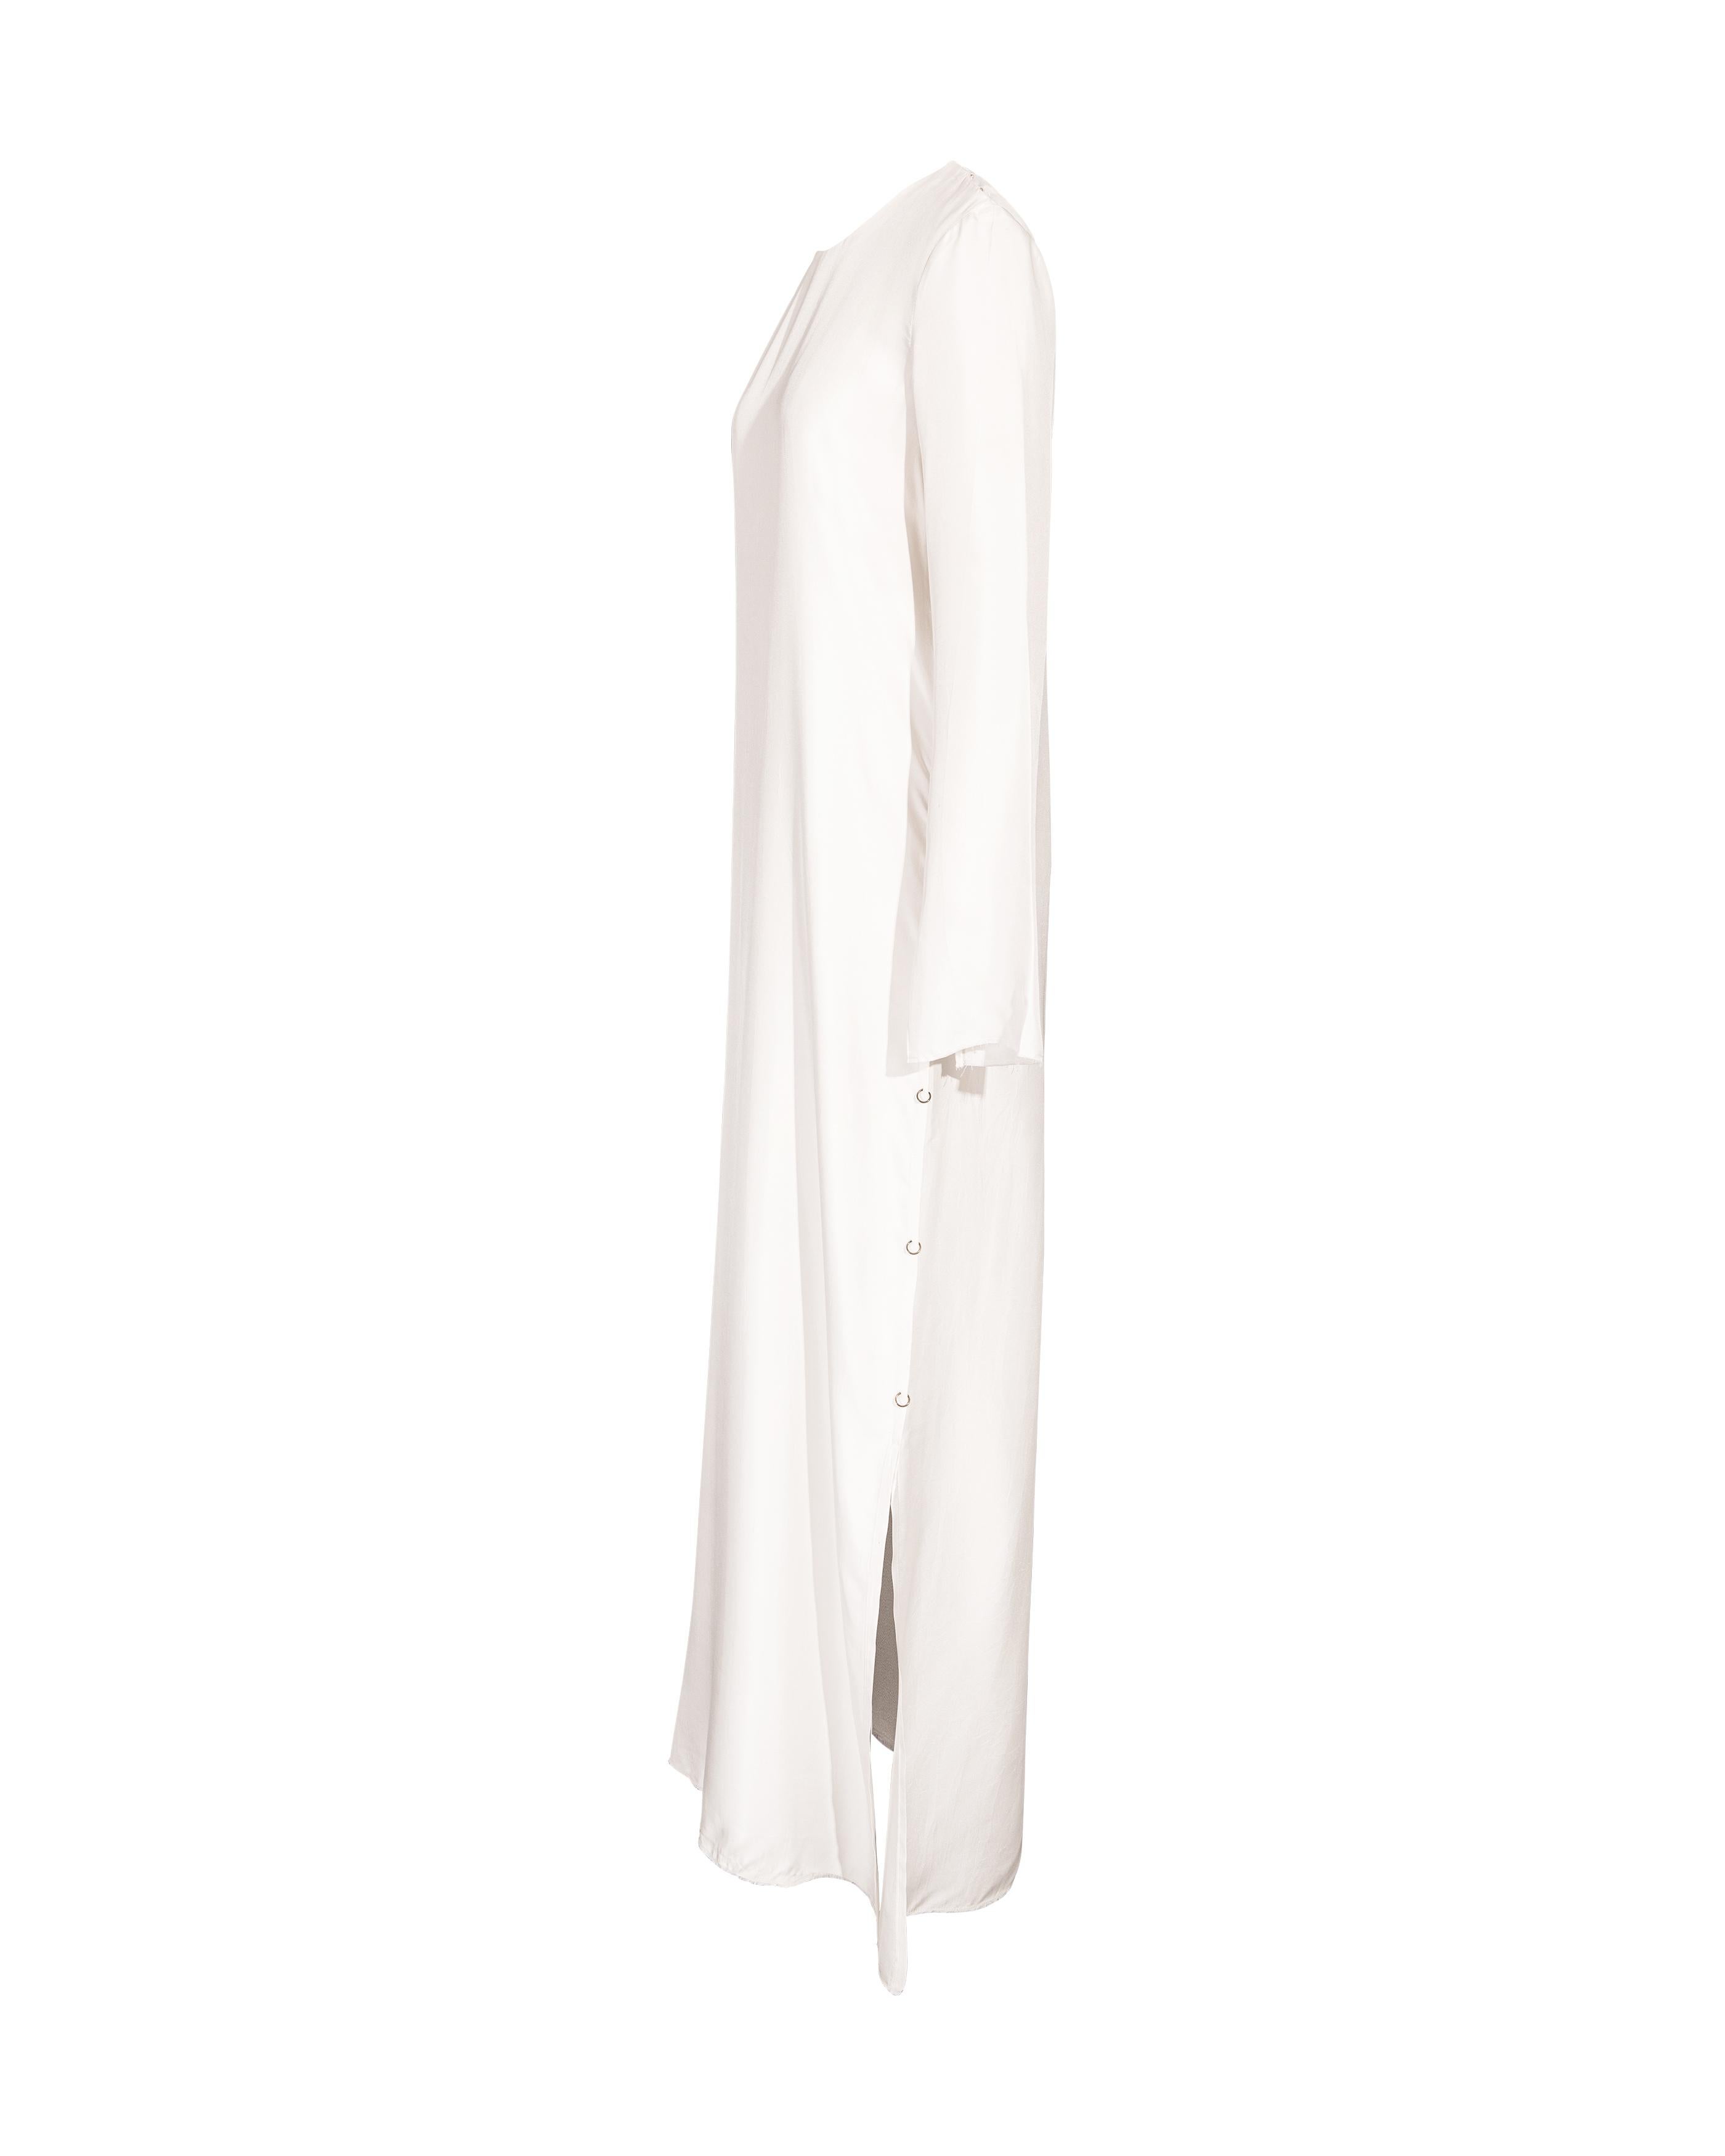 S/S 2016 Calvin Klein white silk long sleeve gown with open sleeves and bronze loop details at sides, with raw unfinished hem. Snap closures at shoulders. Fabric Contents: 100% Silk. In very good vintage condition with minor spot near hemline (not